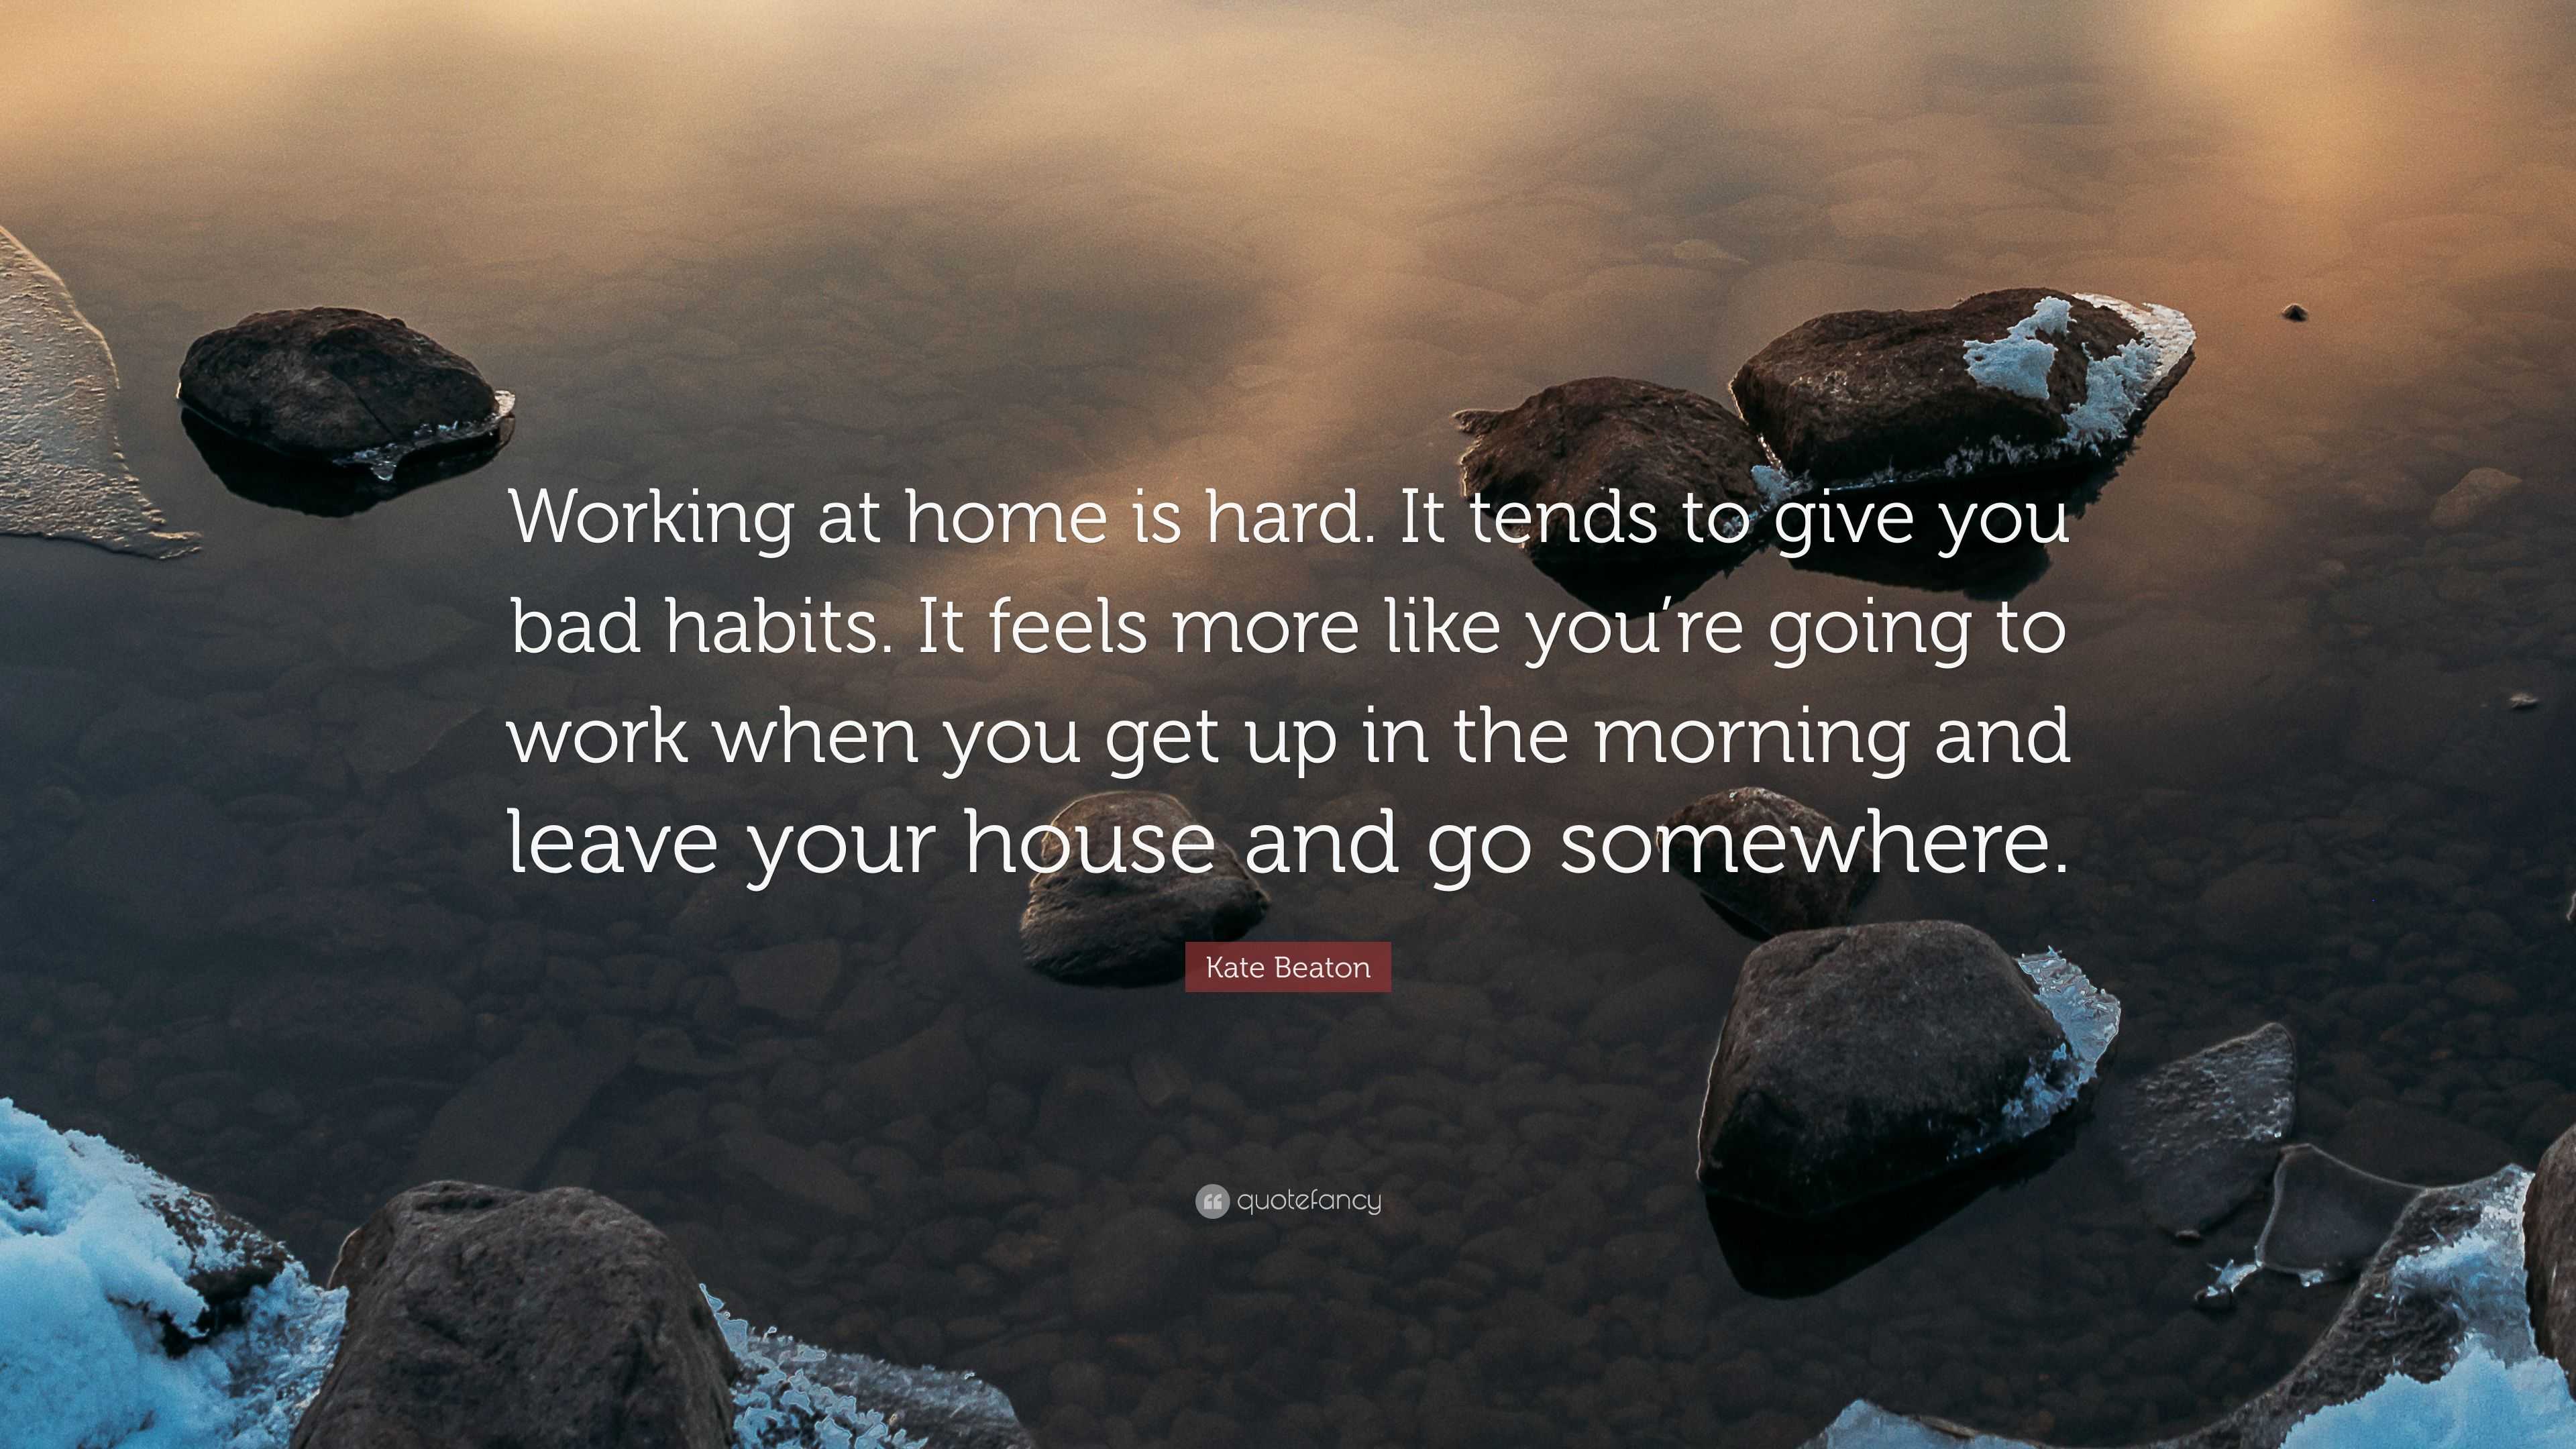 Why Working From Home is Bad for You